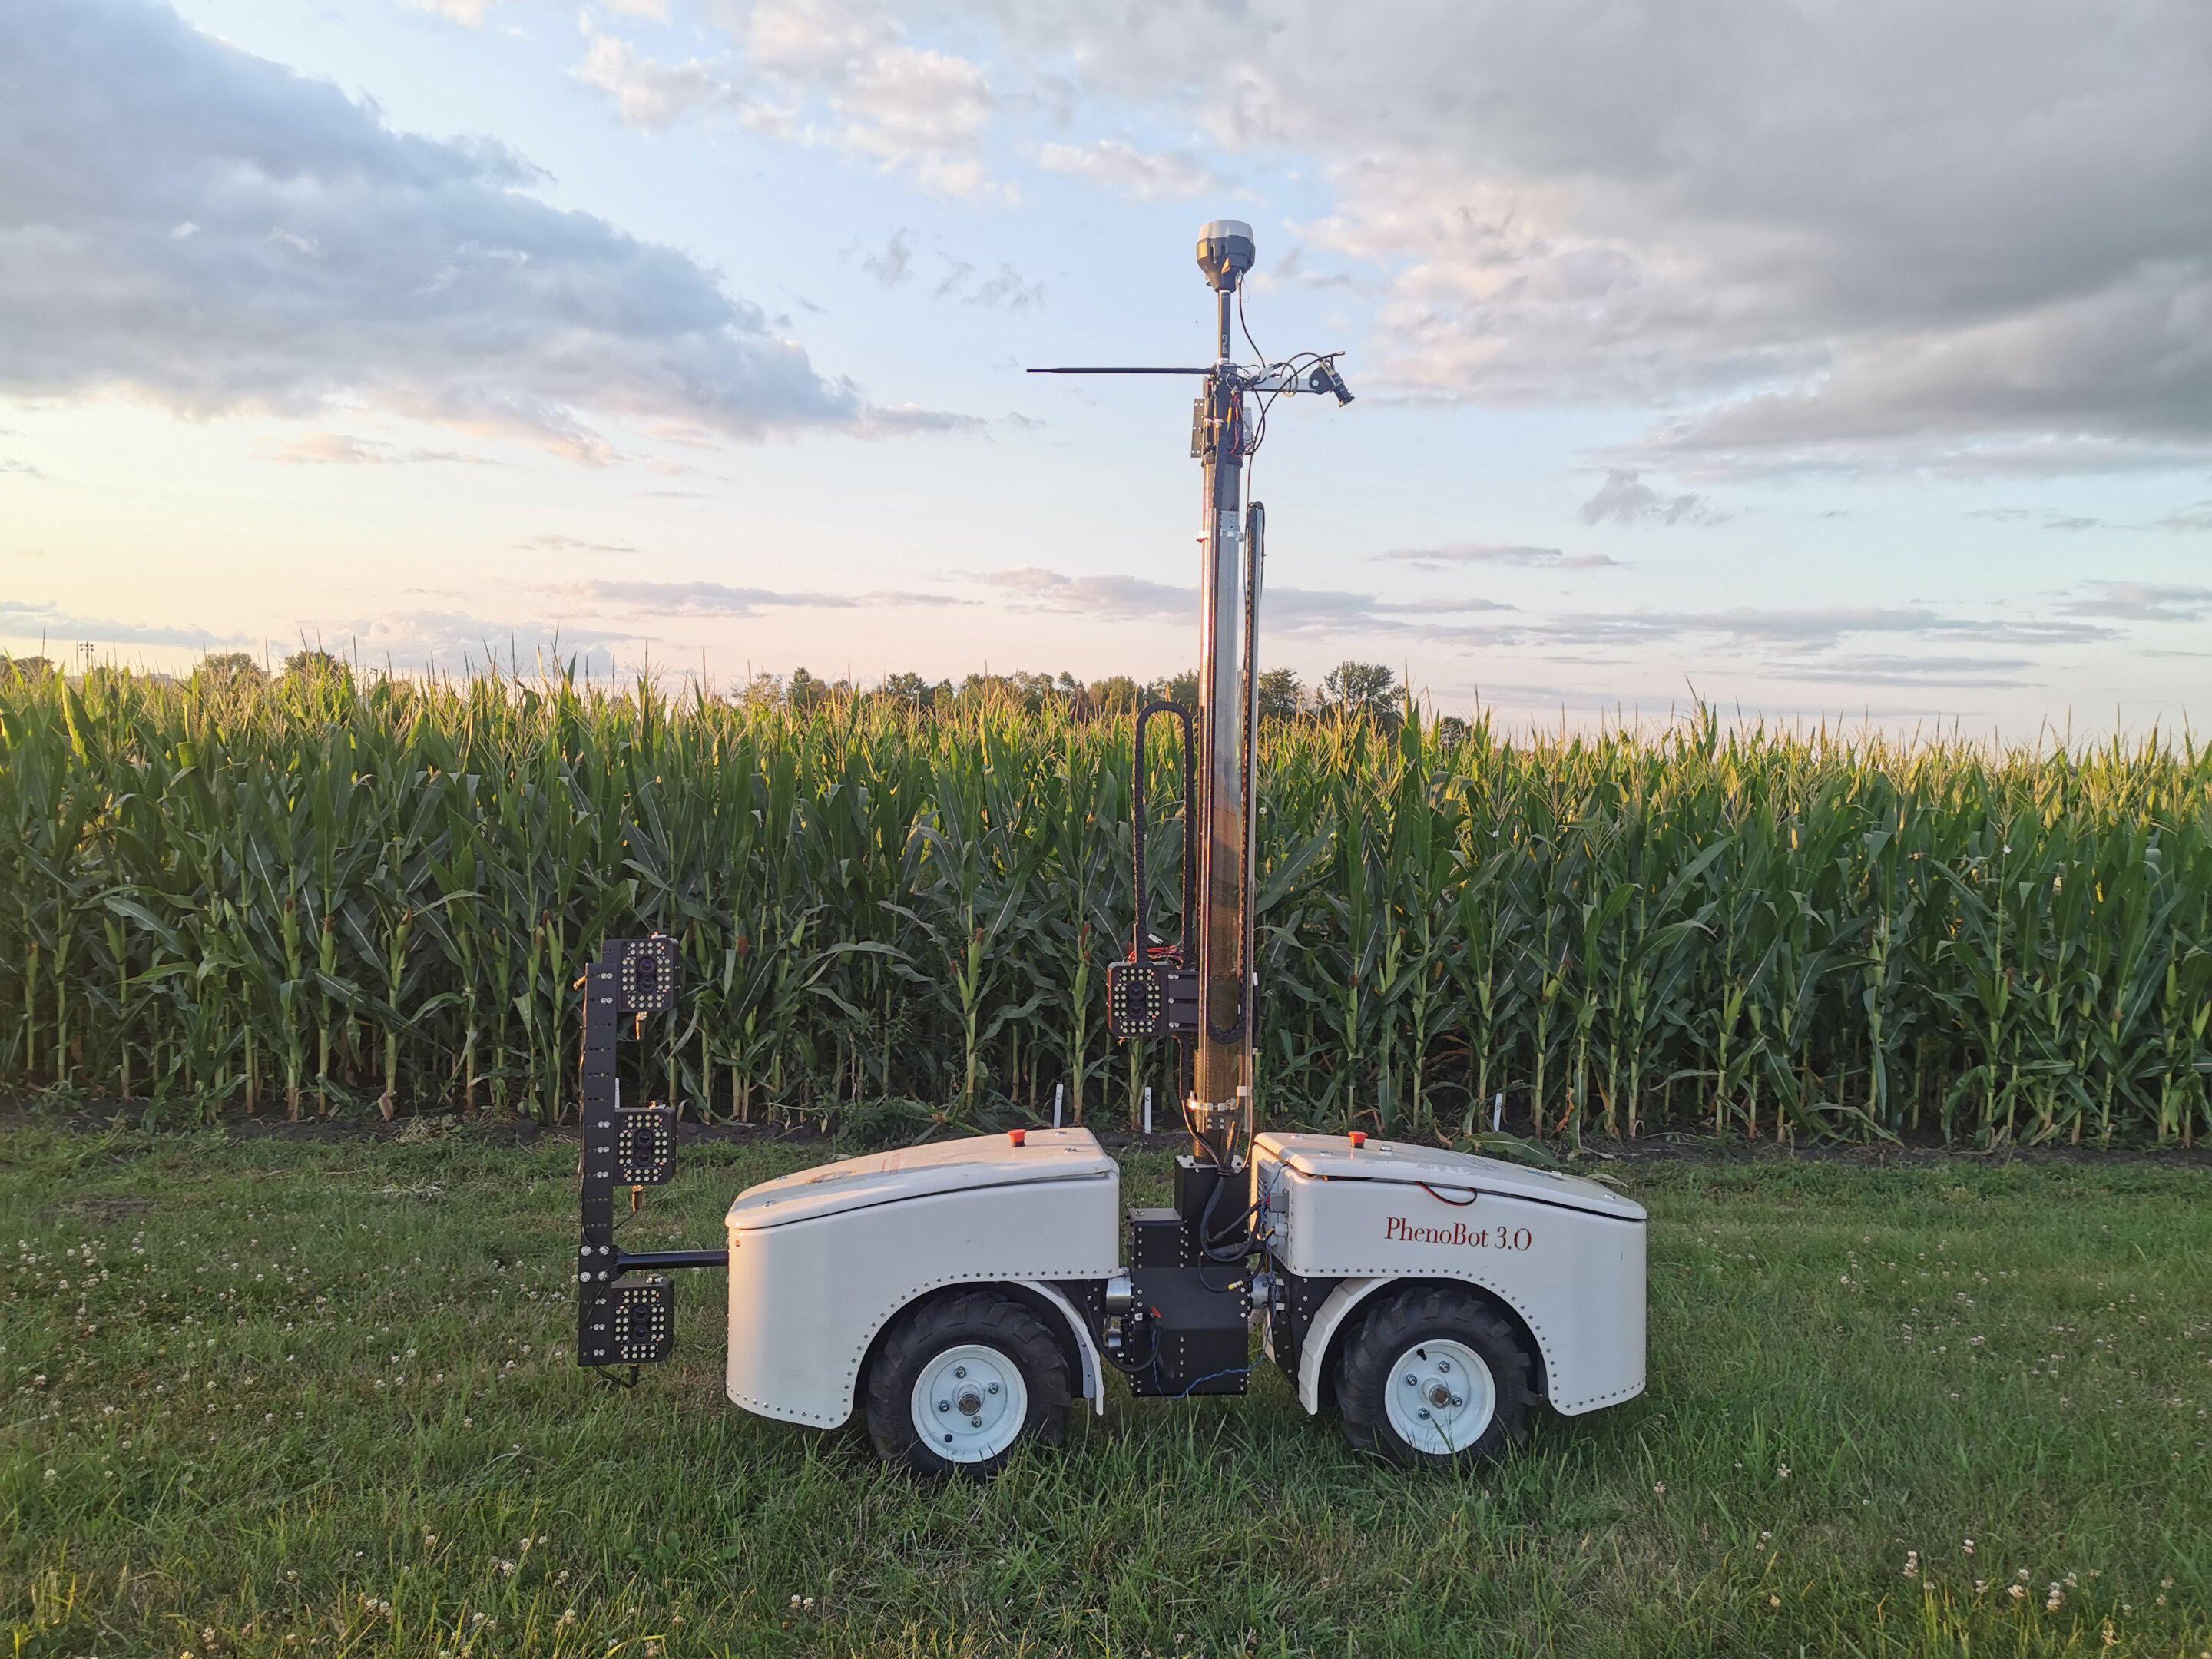 Wheeled robot measures leaf angles to help breed better corn plants